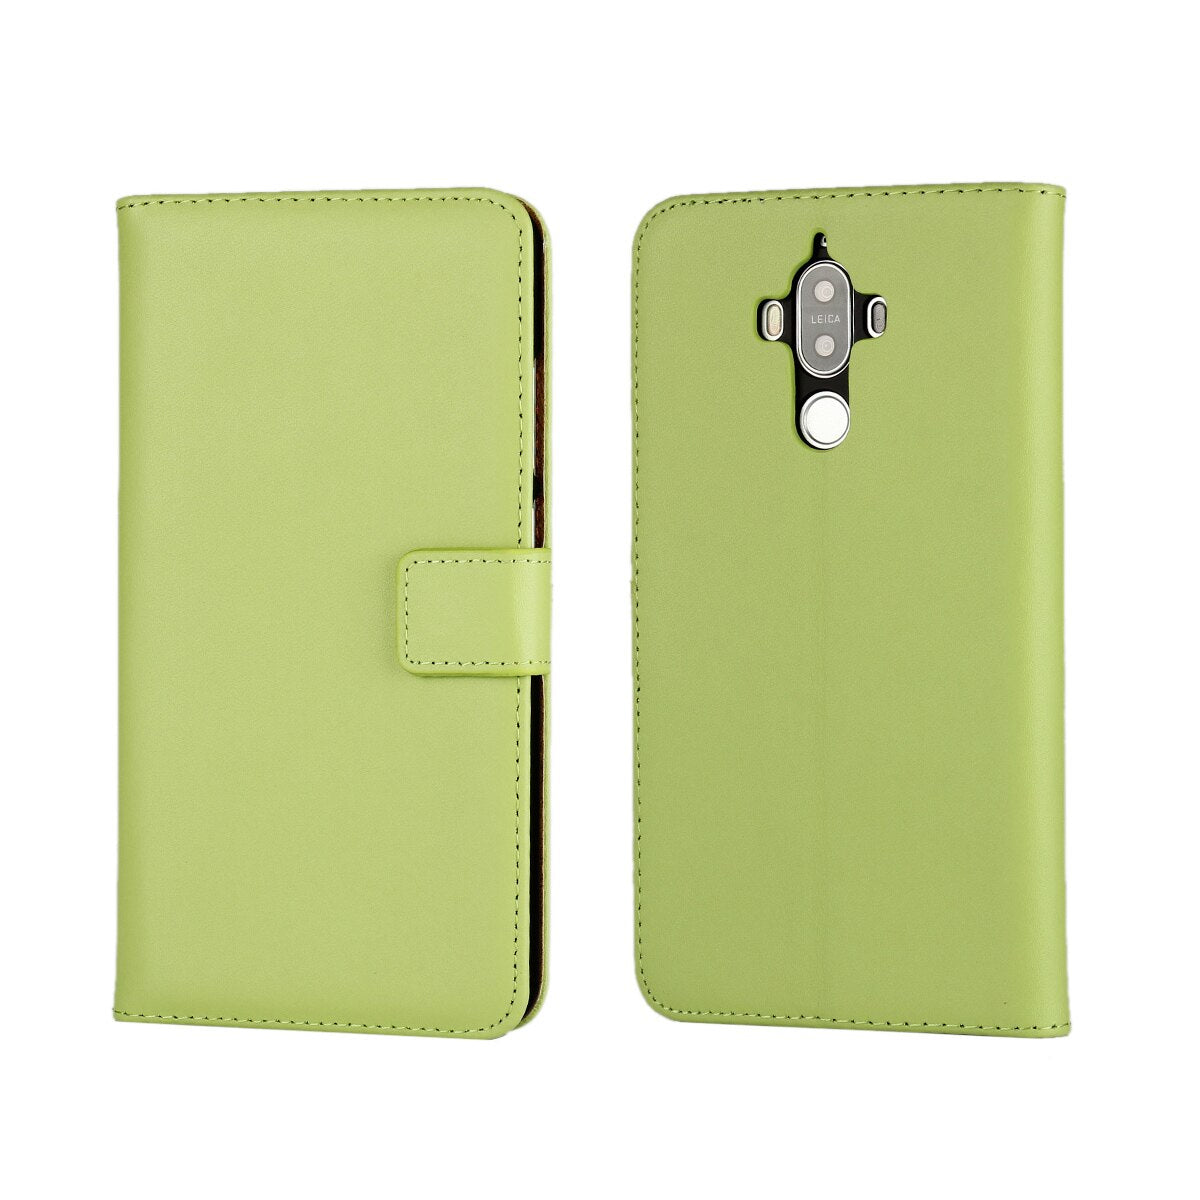 Pu Leather Case For Huawei